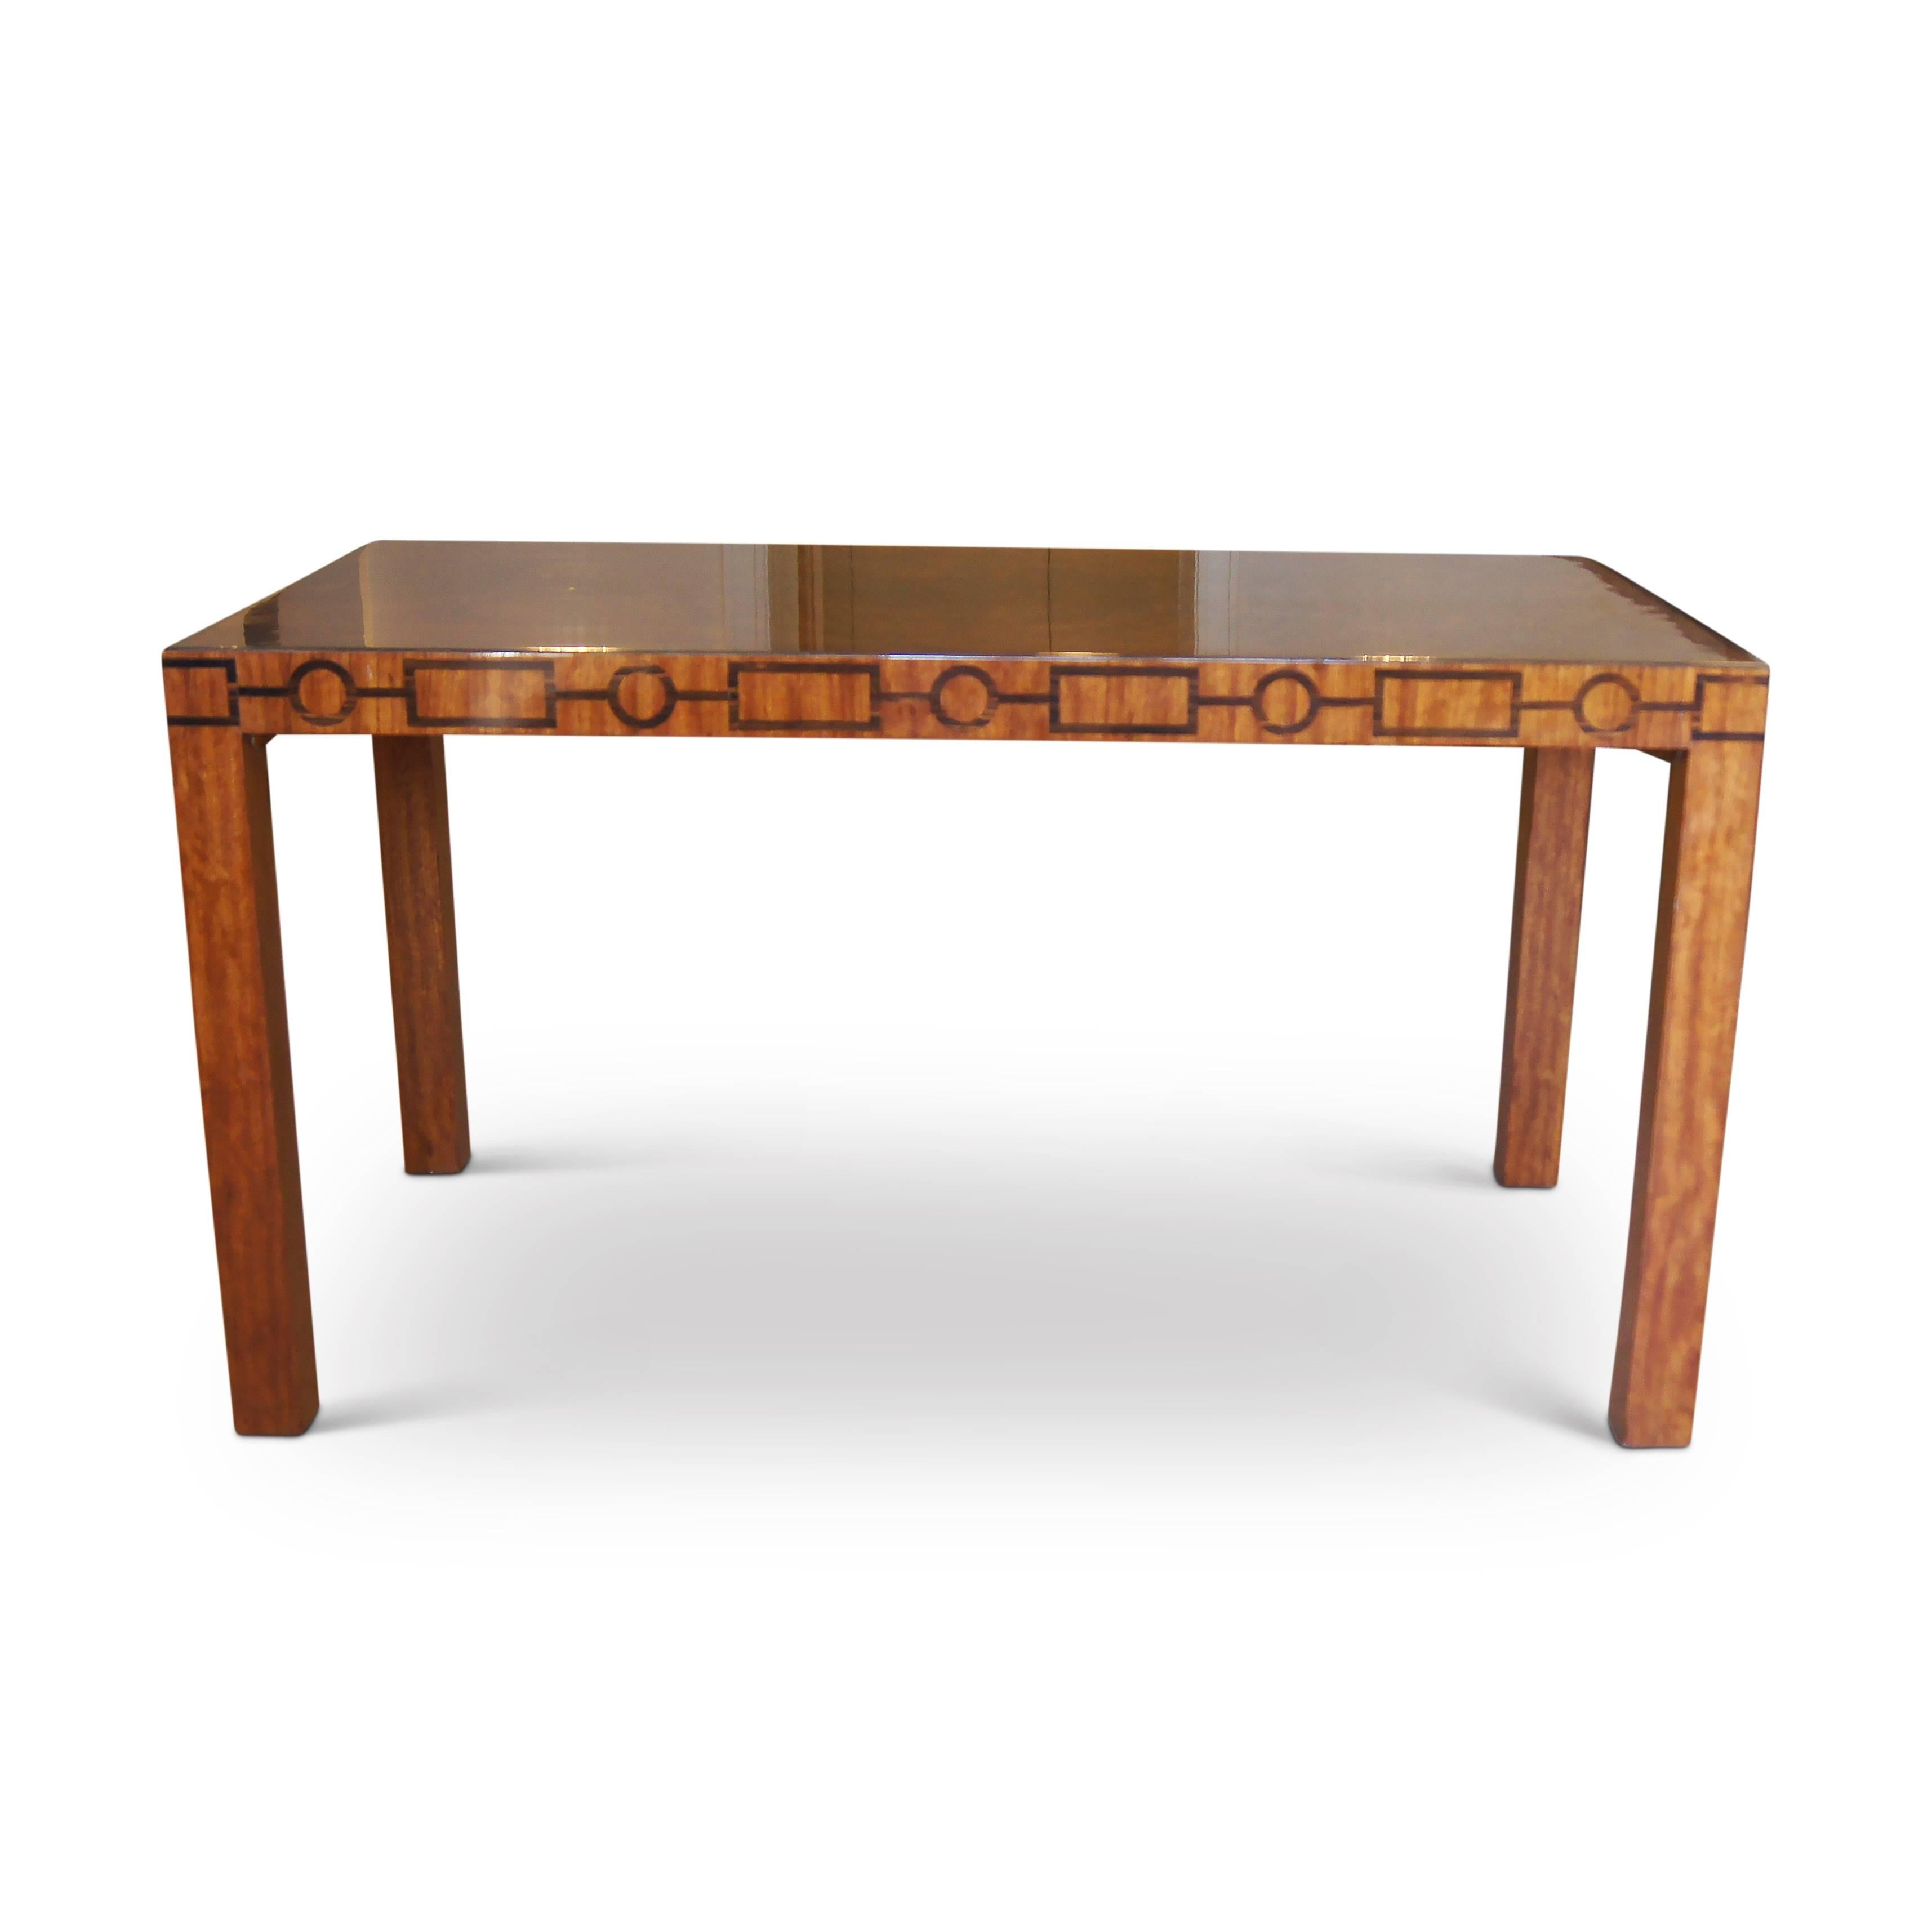 Very fine coffee table with a rectilinear “Parson table”-type form, featuring a top in an extraordinary cut of figurative burl, and a mahogany frame, with a “frieze” design encircling the apron in the form of a chain of circles and rectangles inlaid